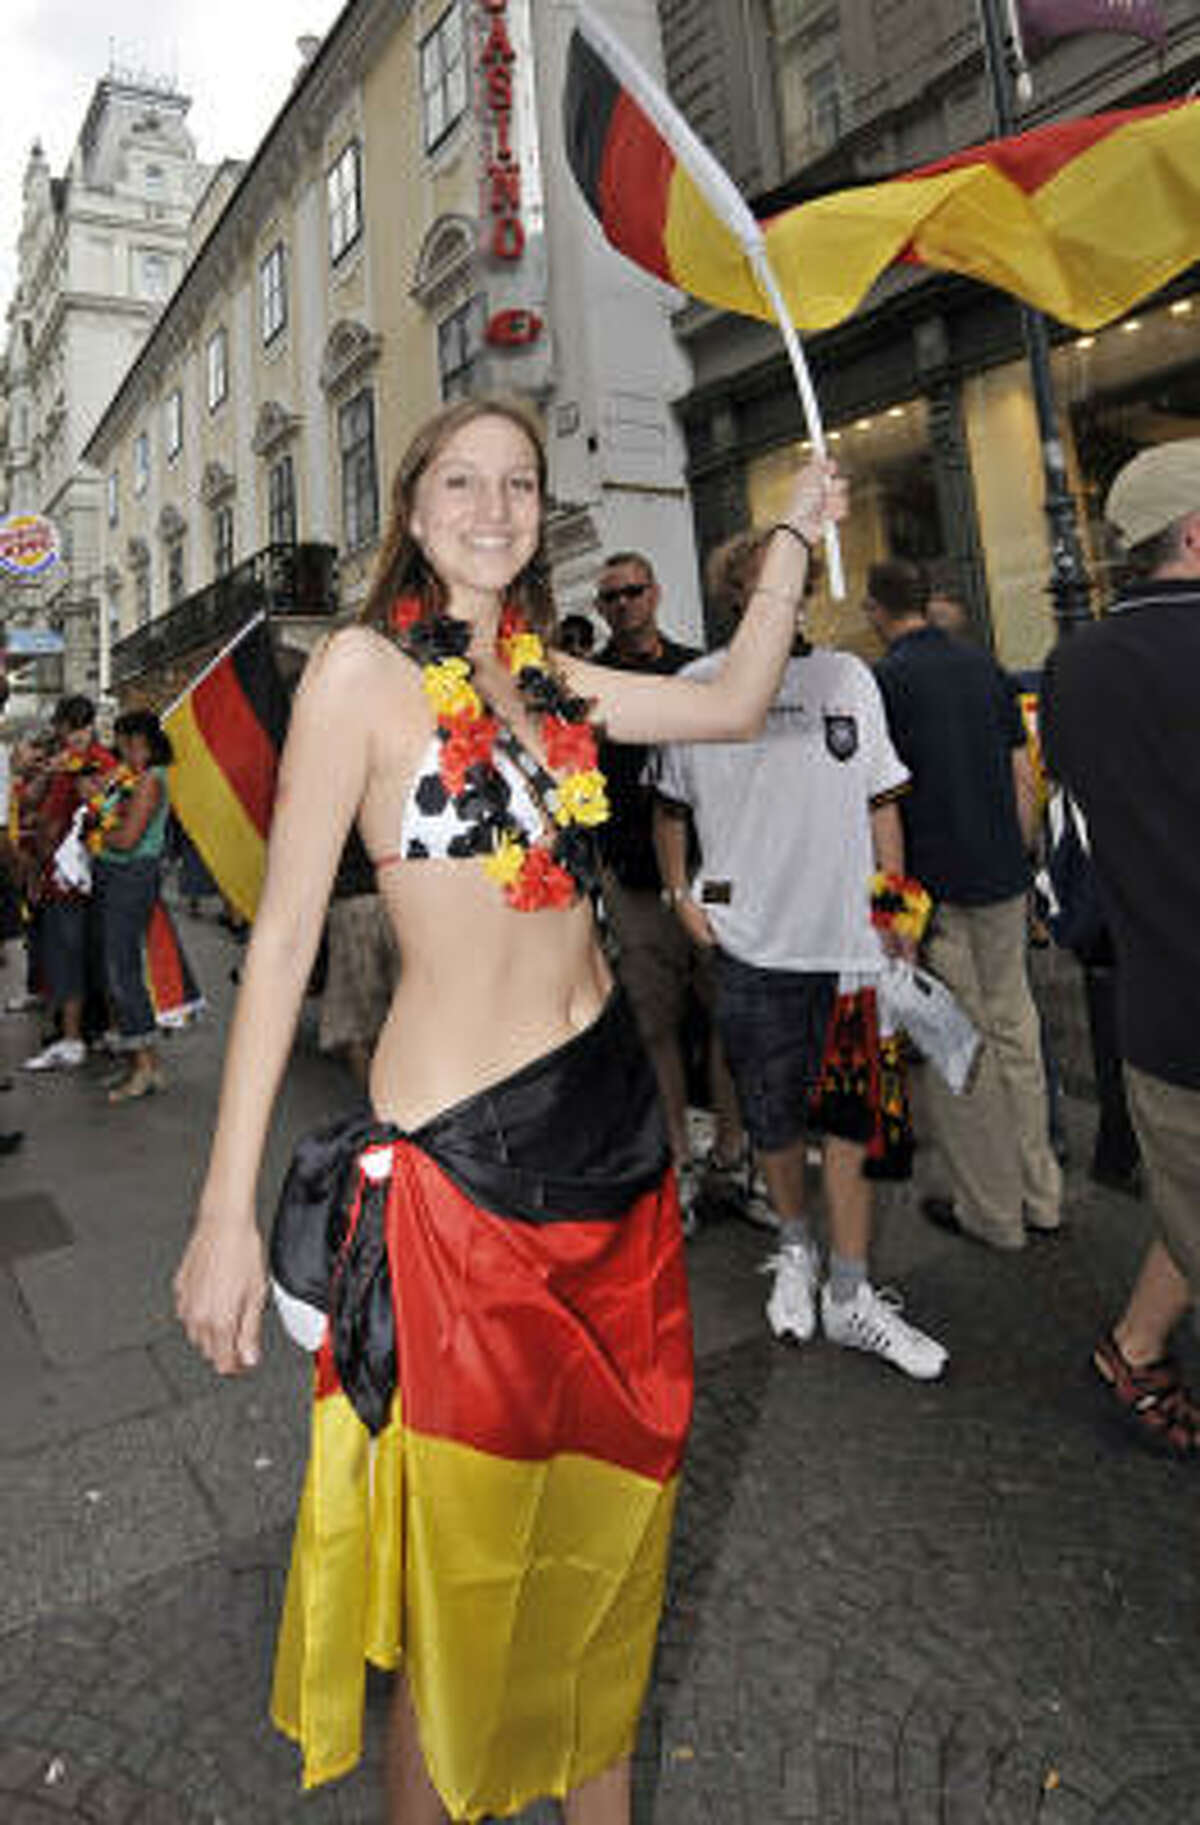 A German fan cheers waving the German flag in downtown Vienna prior to the Euro 2008 European Soccer Championships final between Germany and Spain.